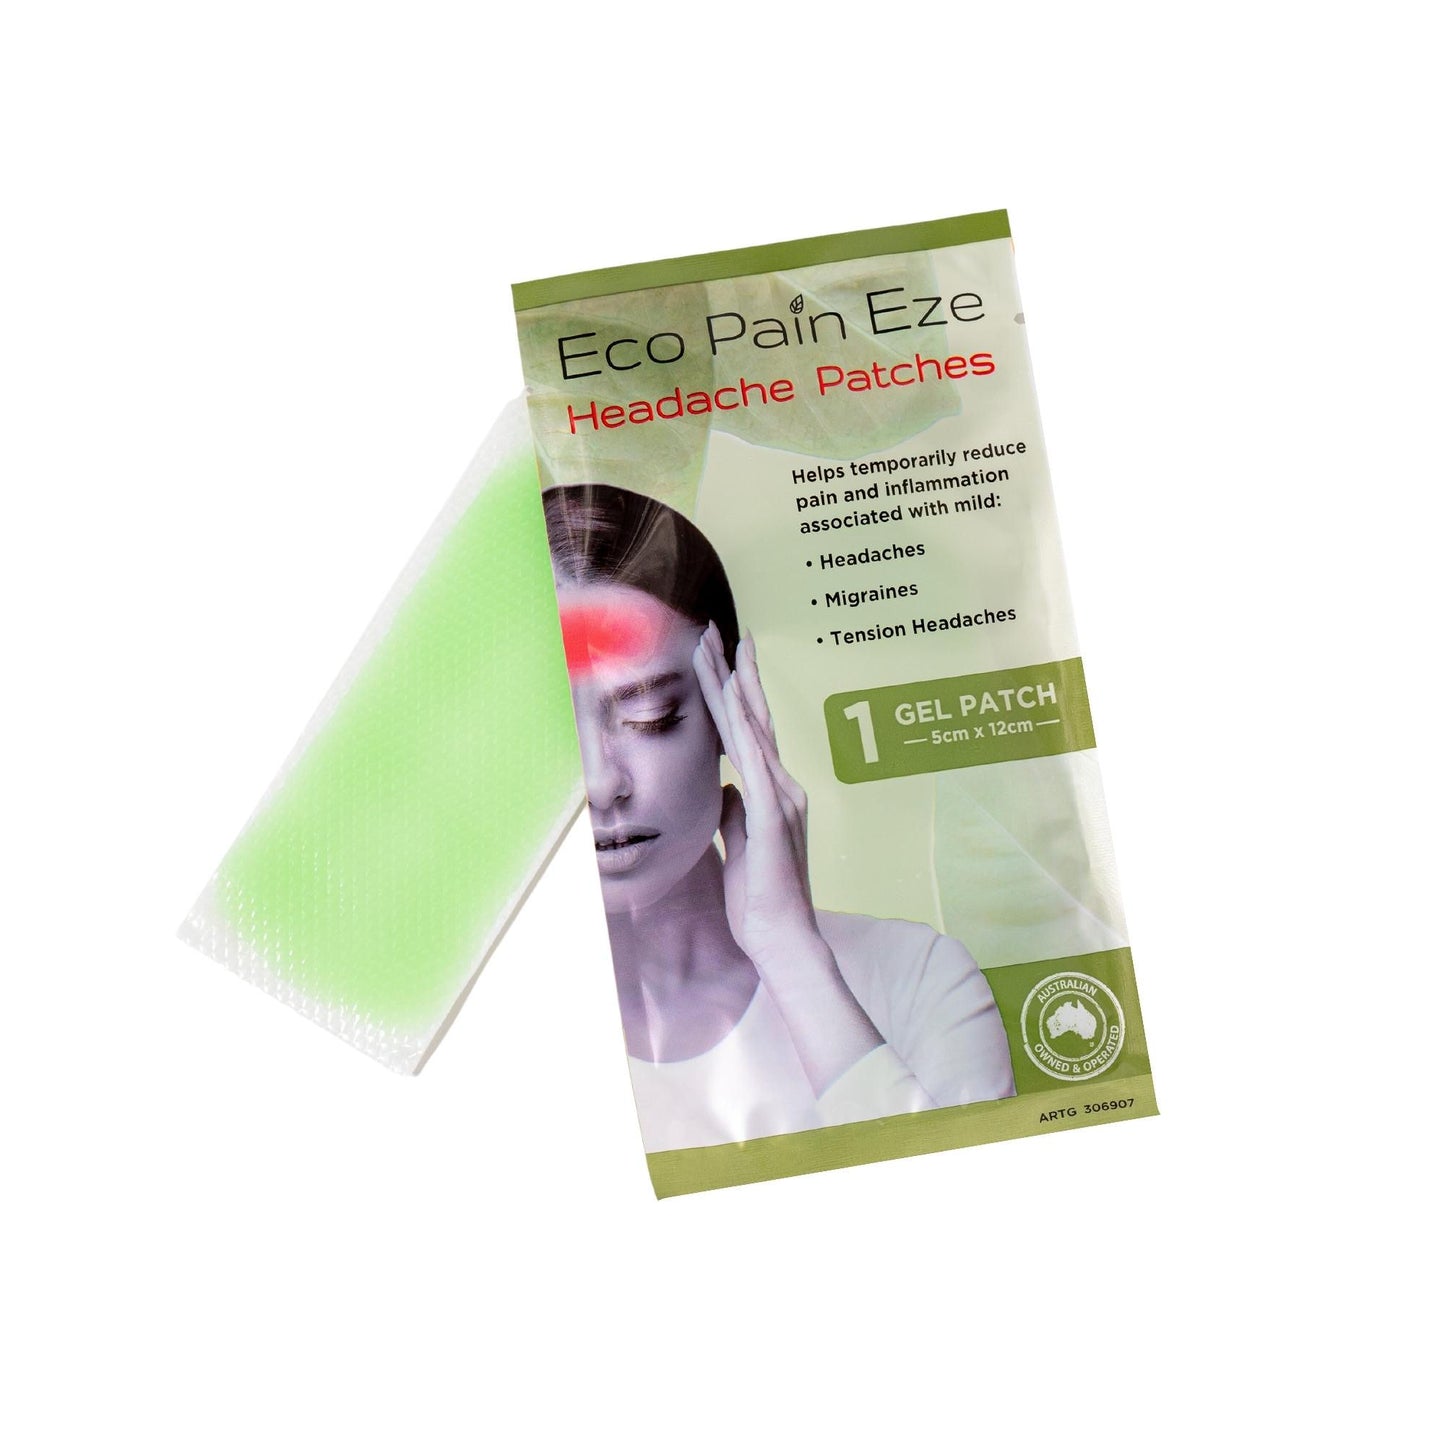 Eco Pain Headache Patches - 1 pack